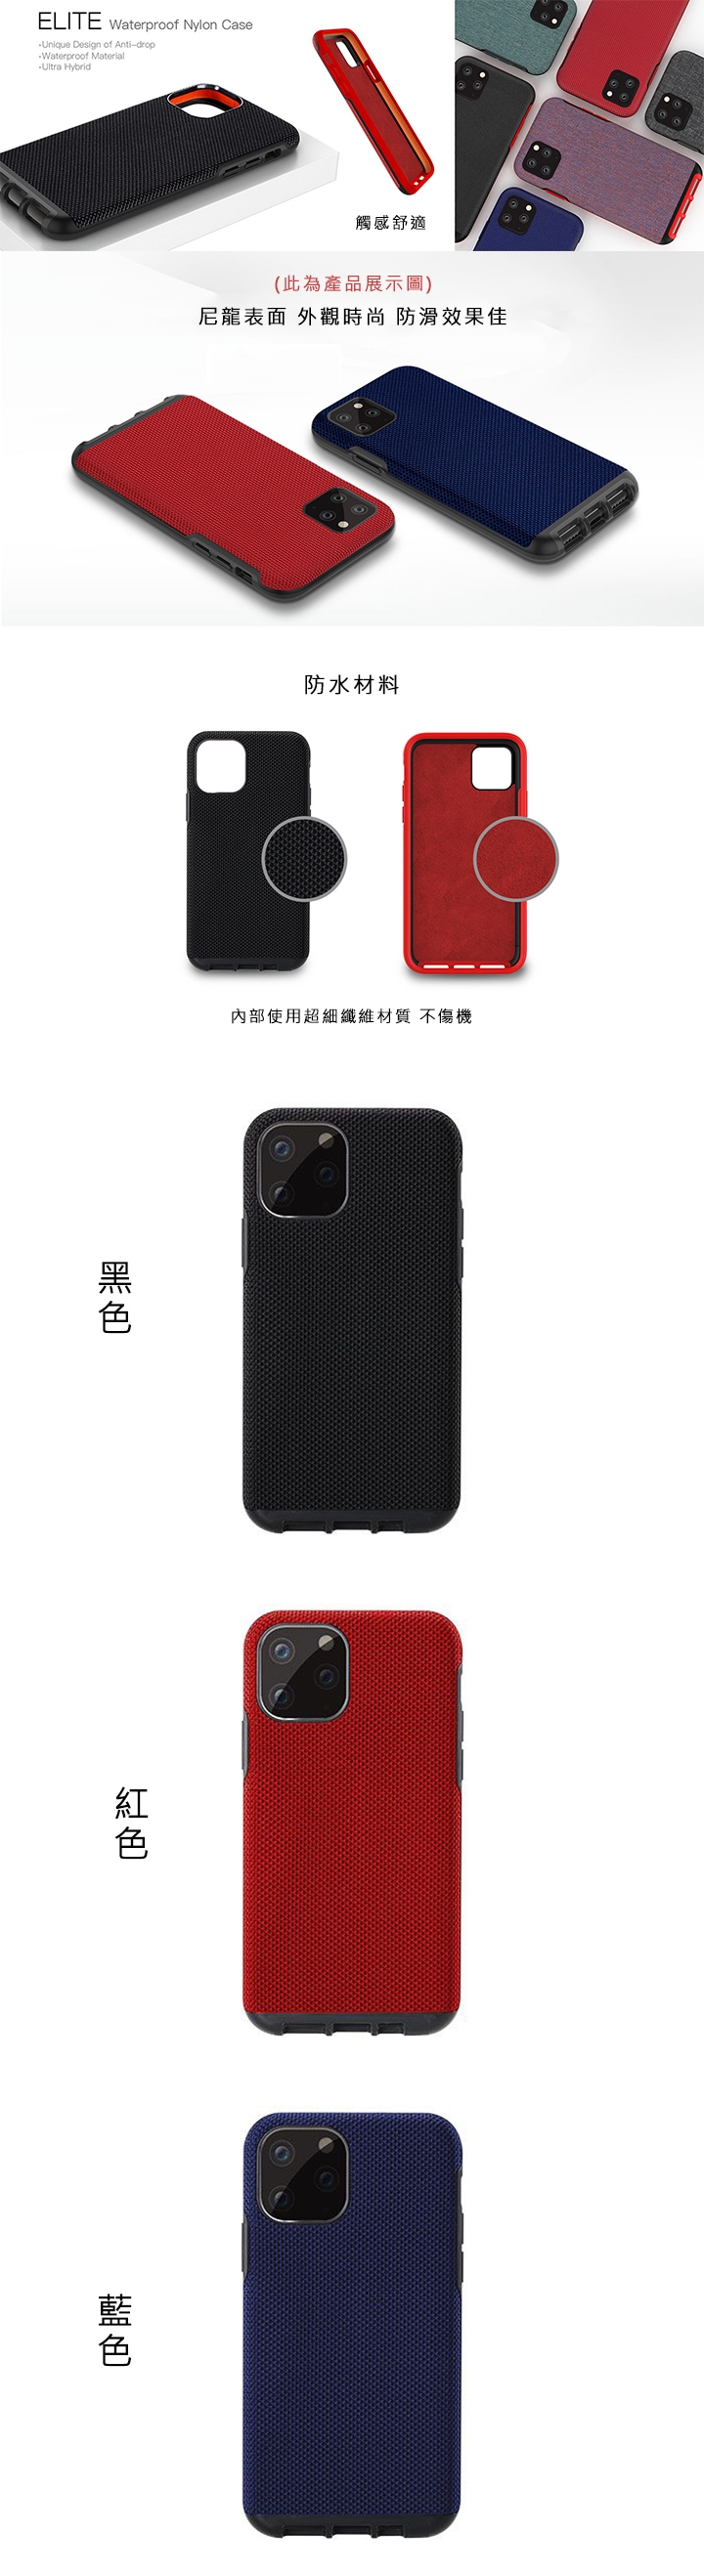 X-Fitted Apple iPhone 11 Pro Max防摔保護殼